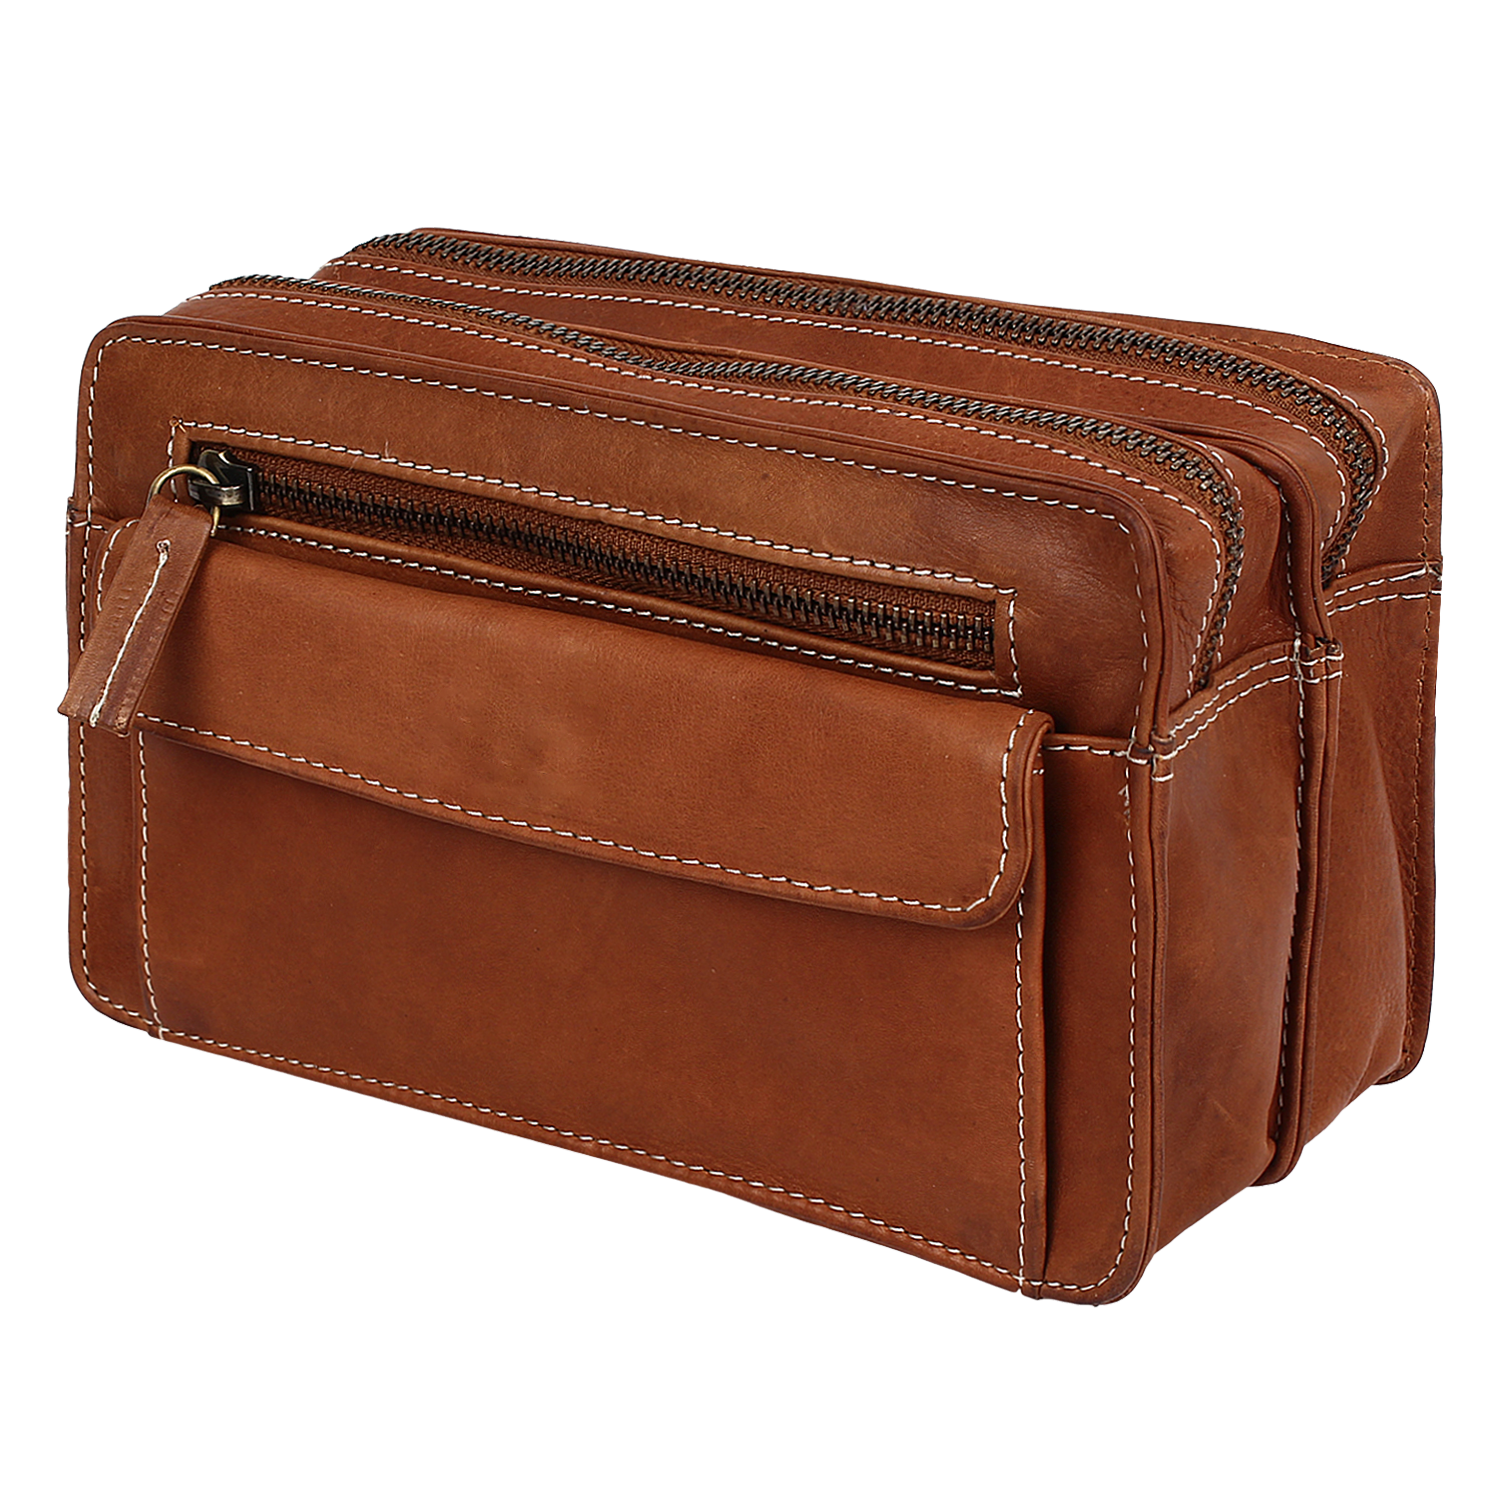 Leather Hand Pouch Men Purse Wallet Clutch Wrist Bag Him Her By Rustic Town  : Amazon.ca: Clothing, Shoes & Accessories